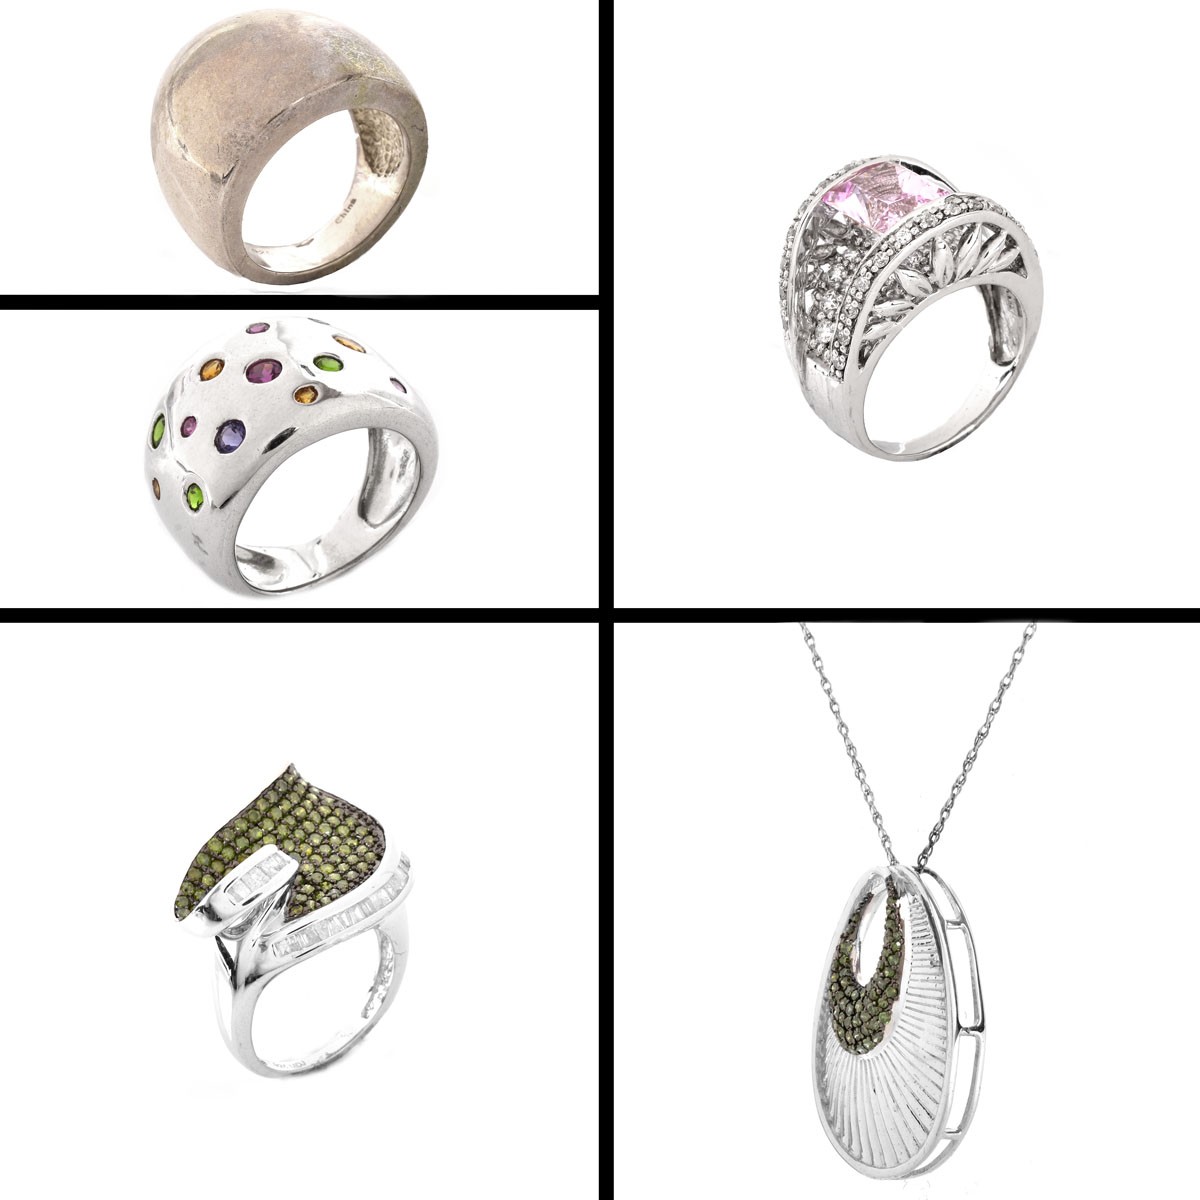 5 Pieces Sterling Silver Fashion Jewelry